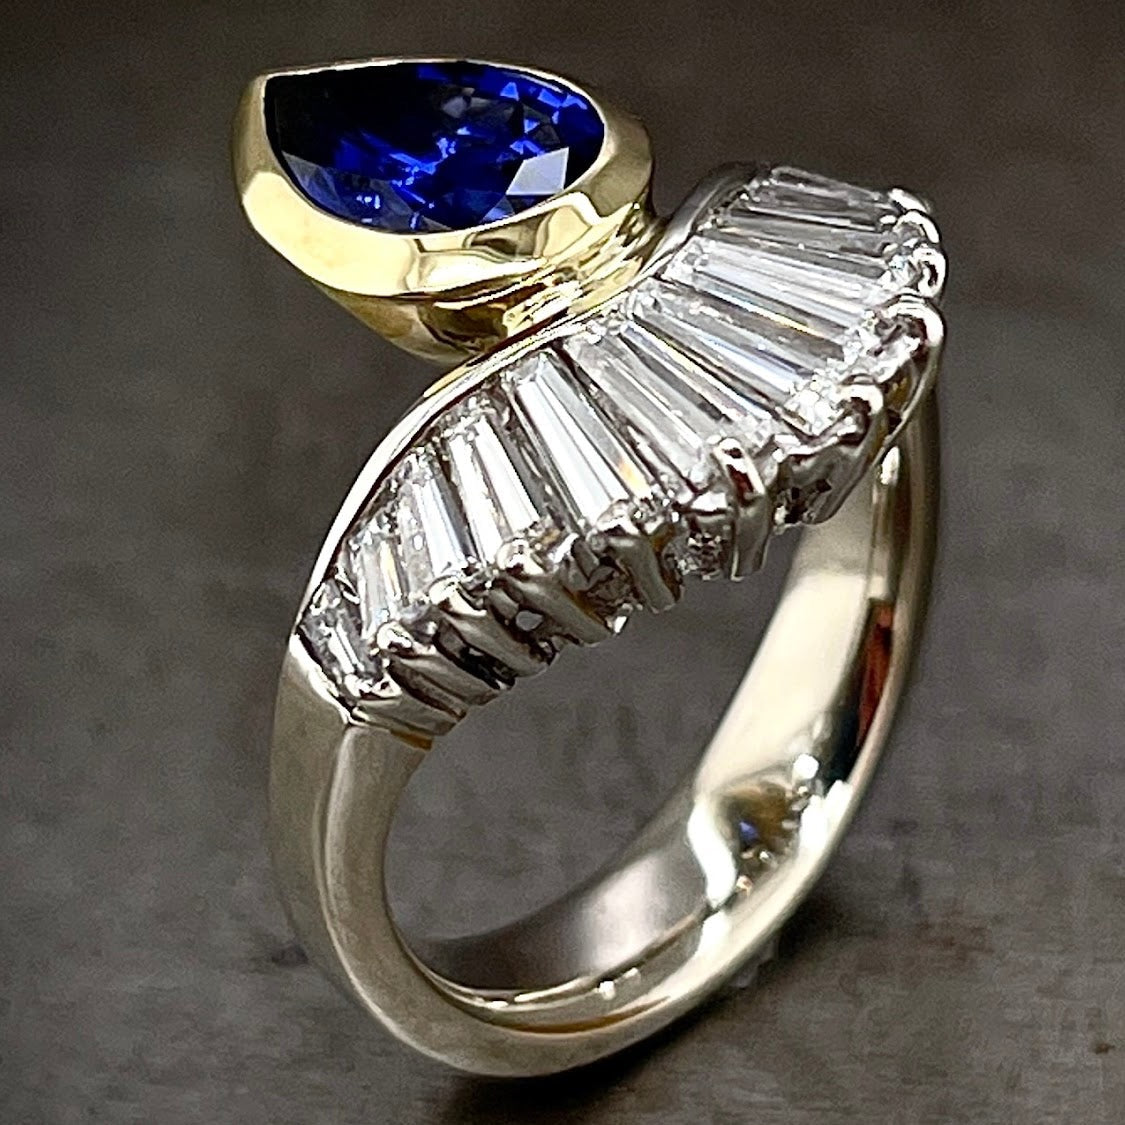 Angled View of Blue Sapphire and Tapered Baguette Ring.  The tapered diamond baguettes face the front of the image.  